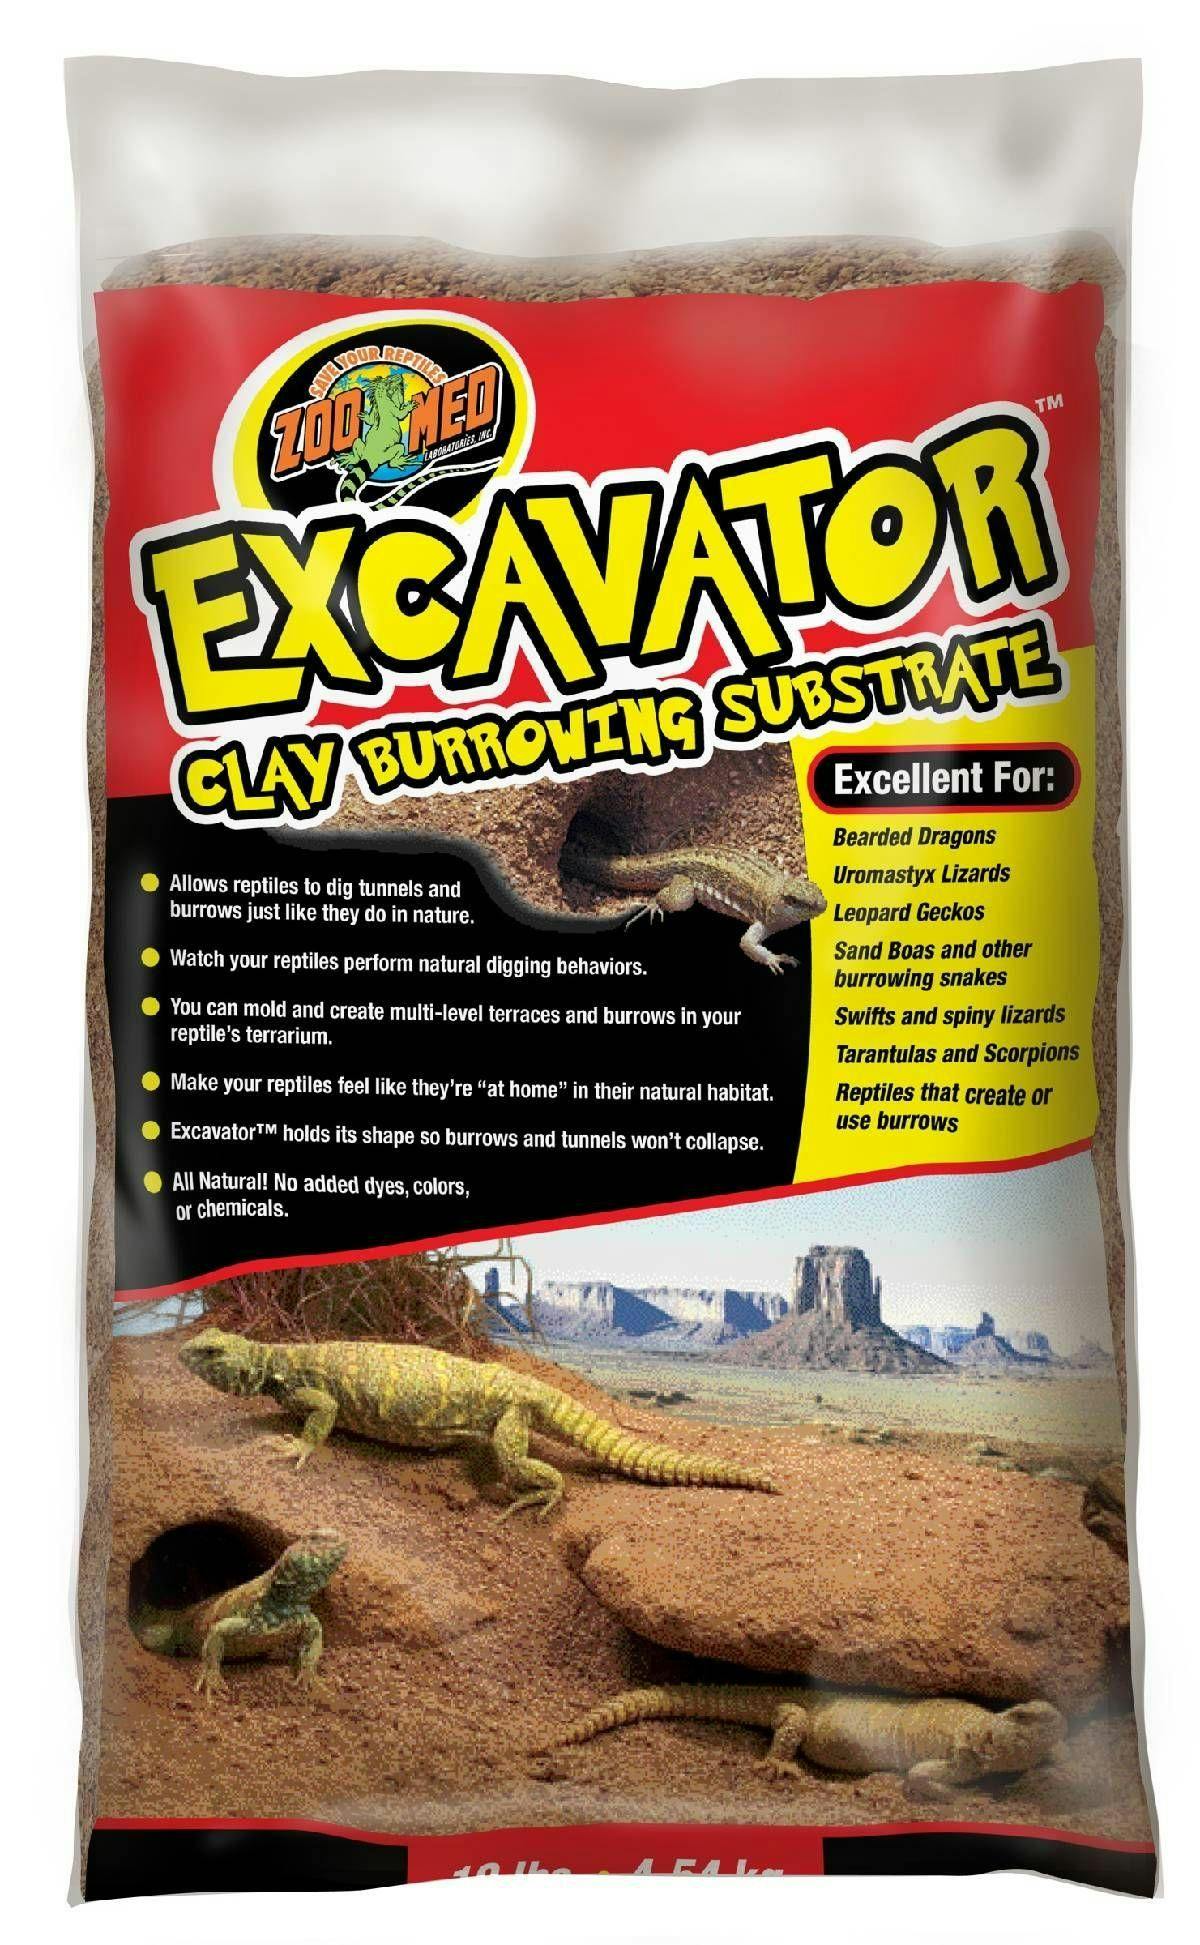 Image for Zoo Med Excavator Clay Burrowing Substrate (10 lb) by Josh's Frogs